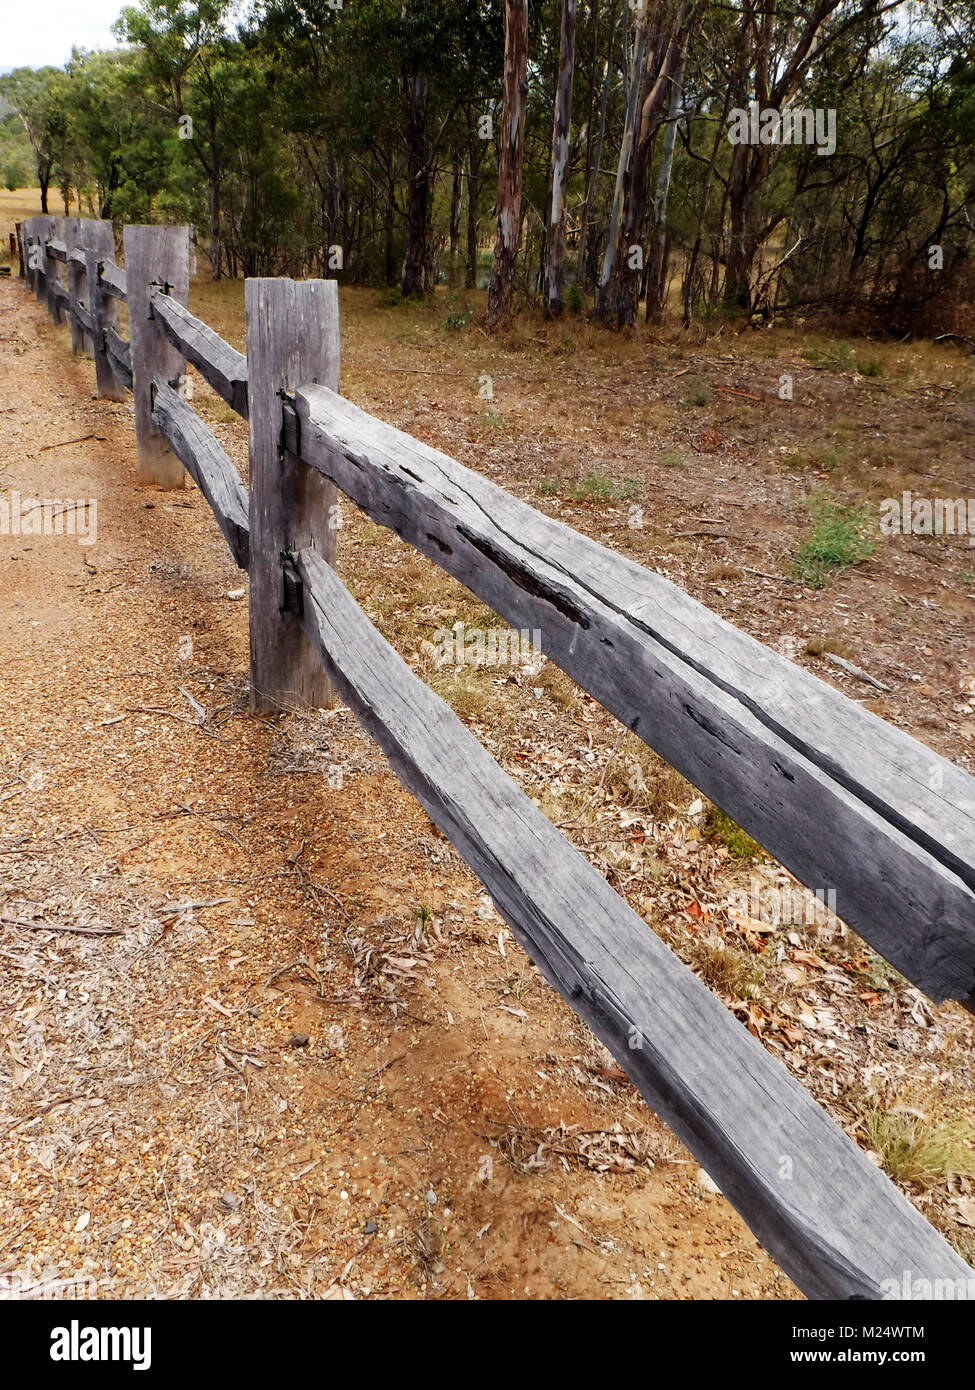 Rustic wooden fence Stock Photo